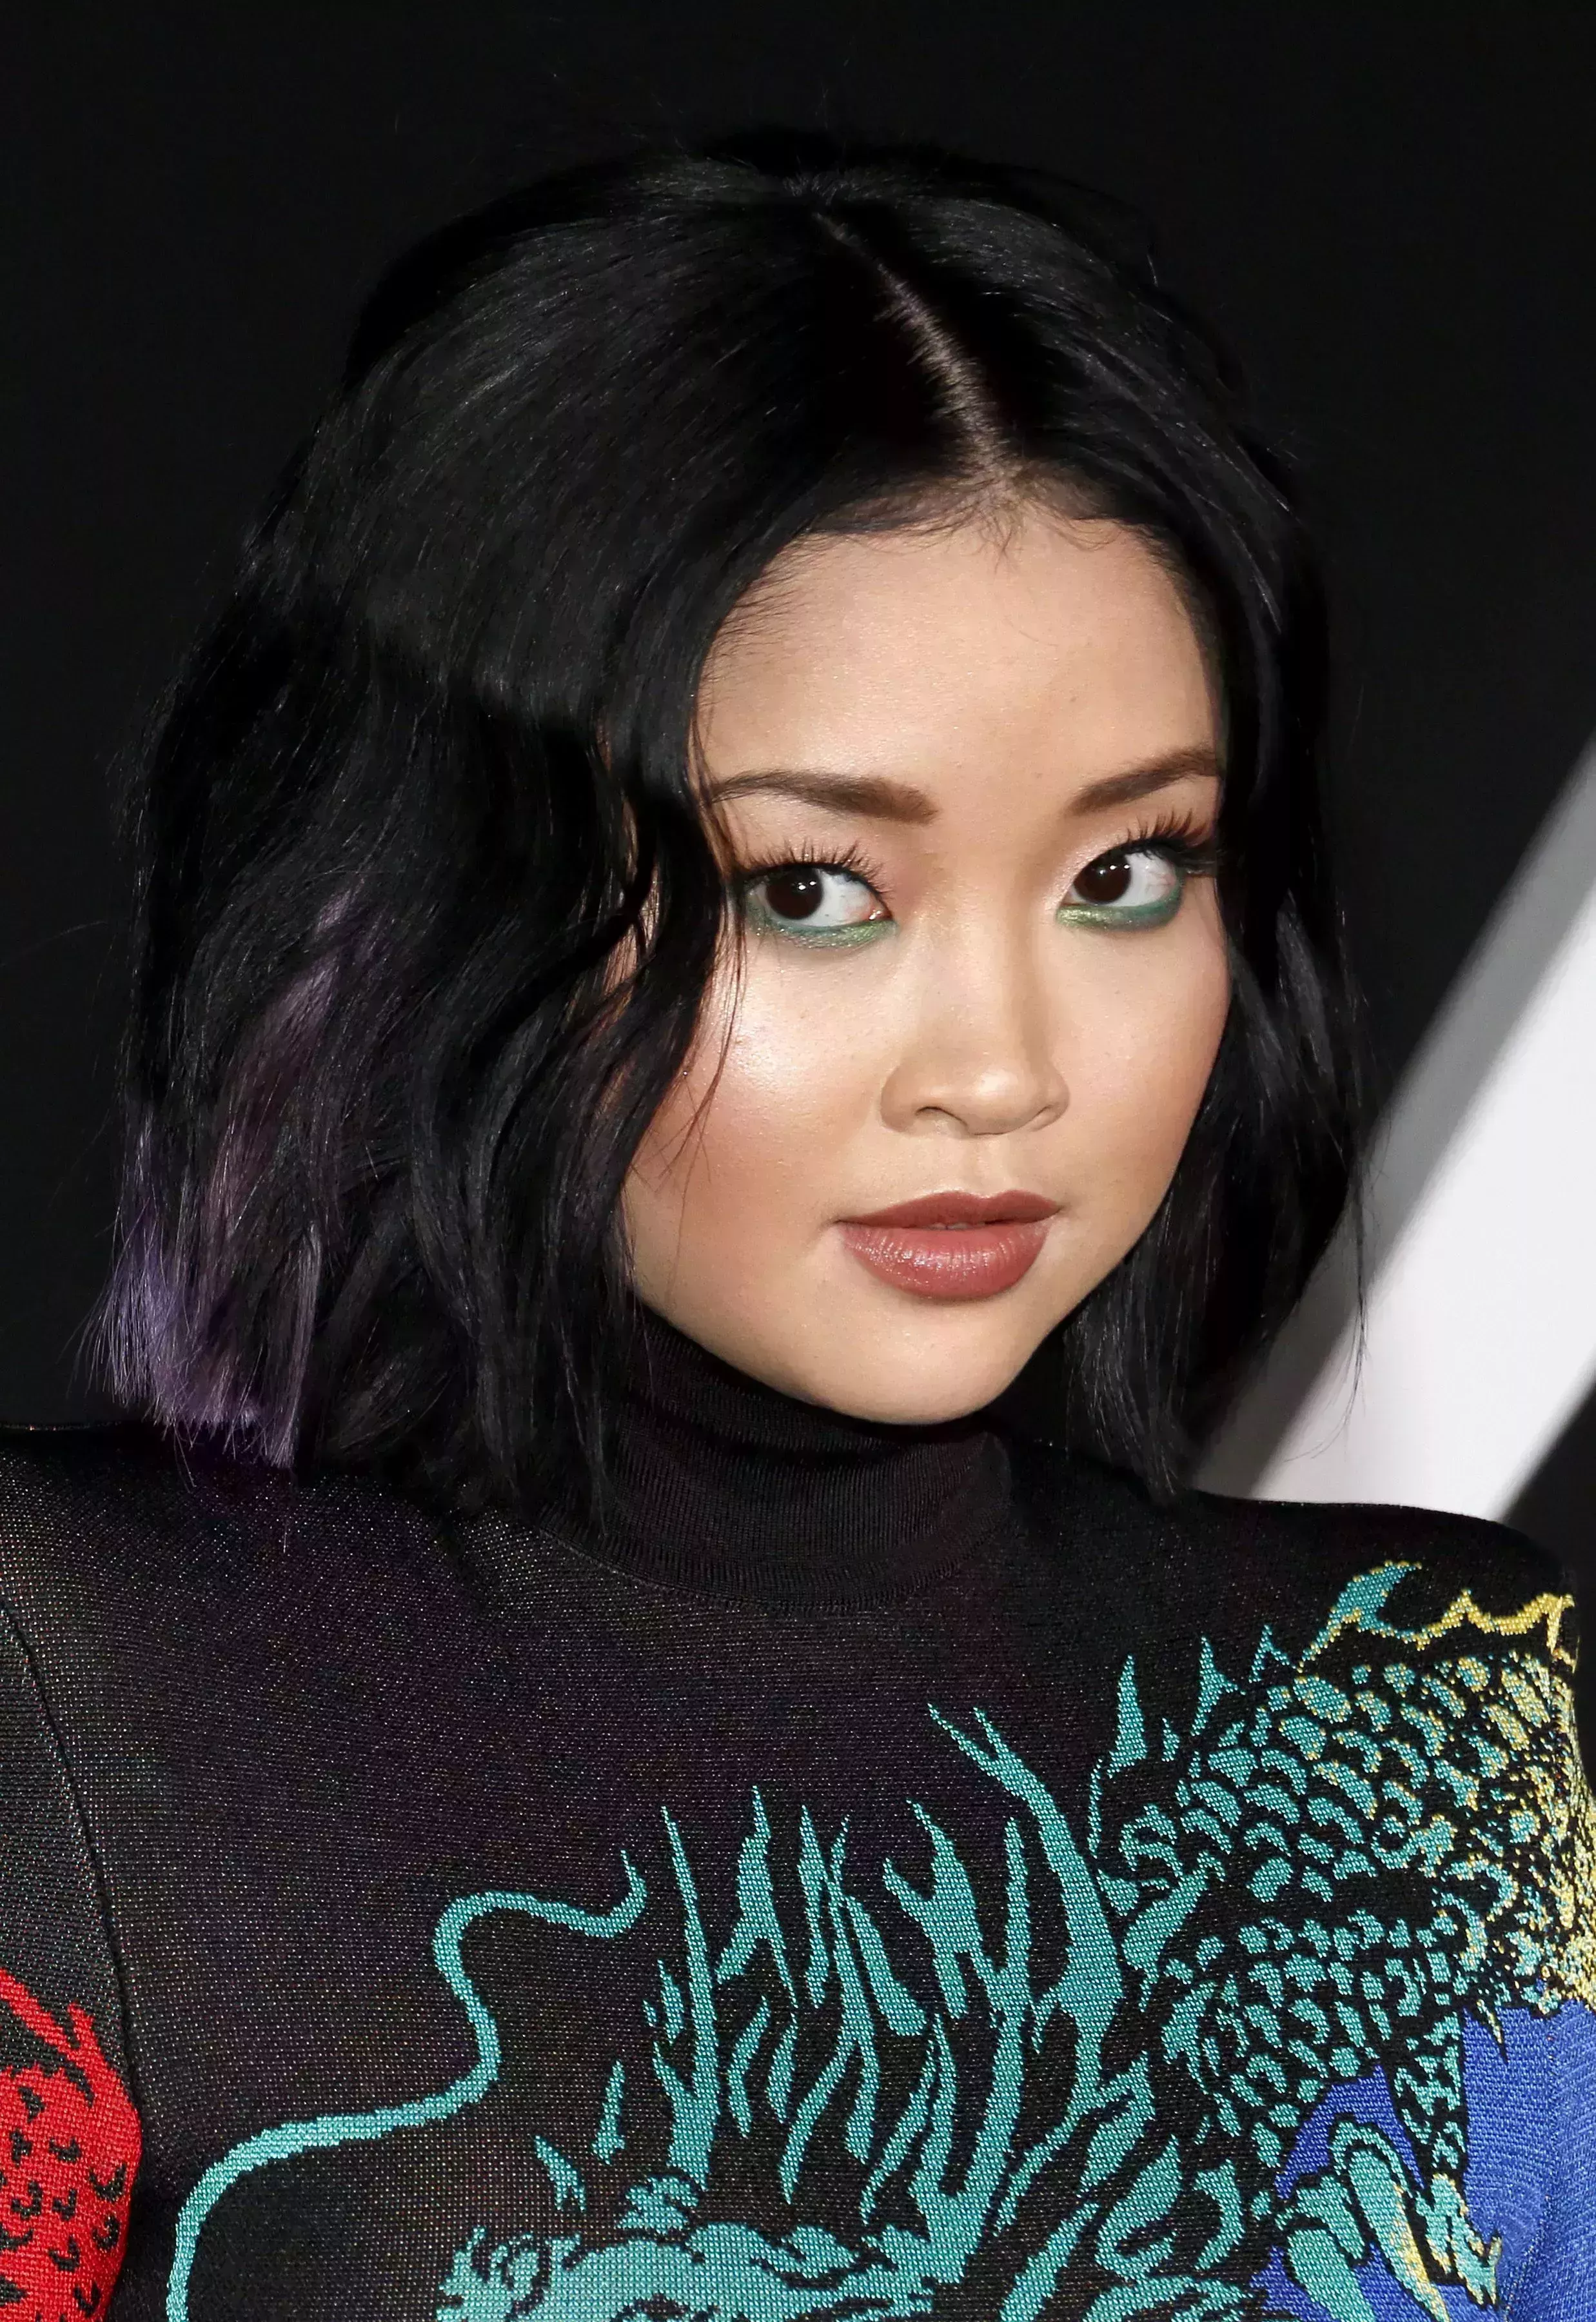 Lana Condor’s Short Hairstyle with Purple Highlights